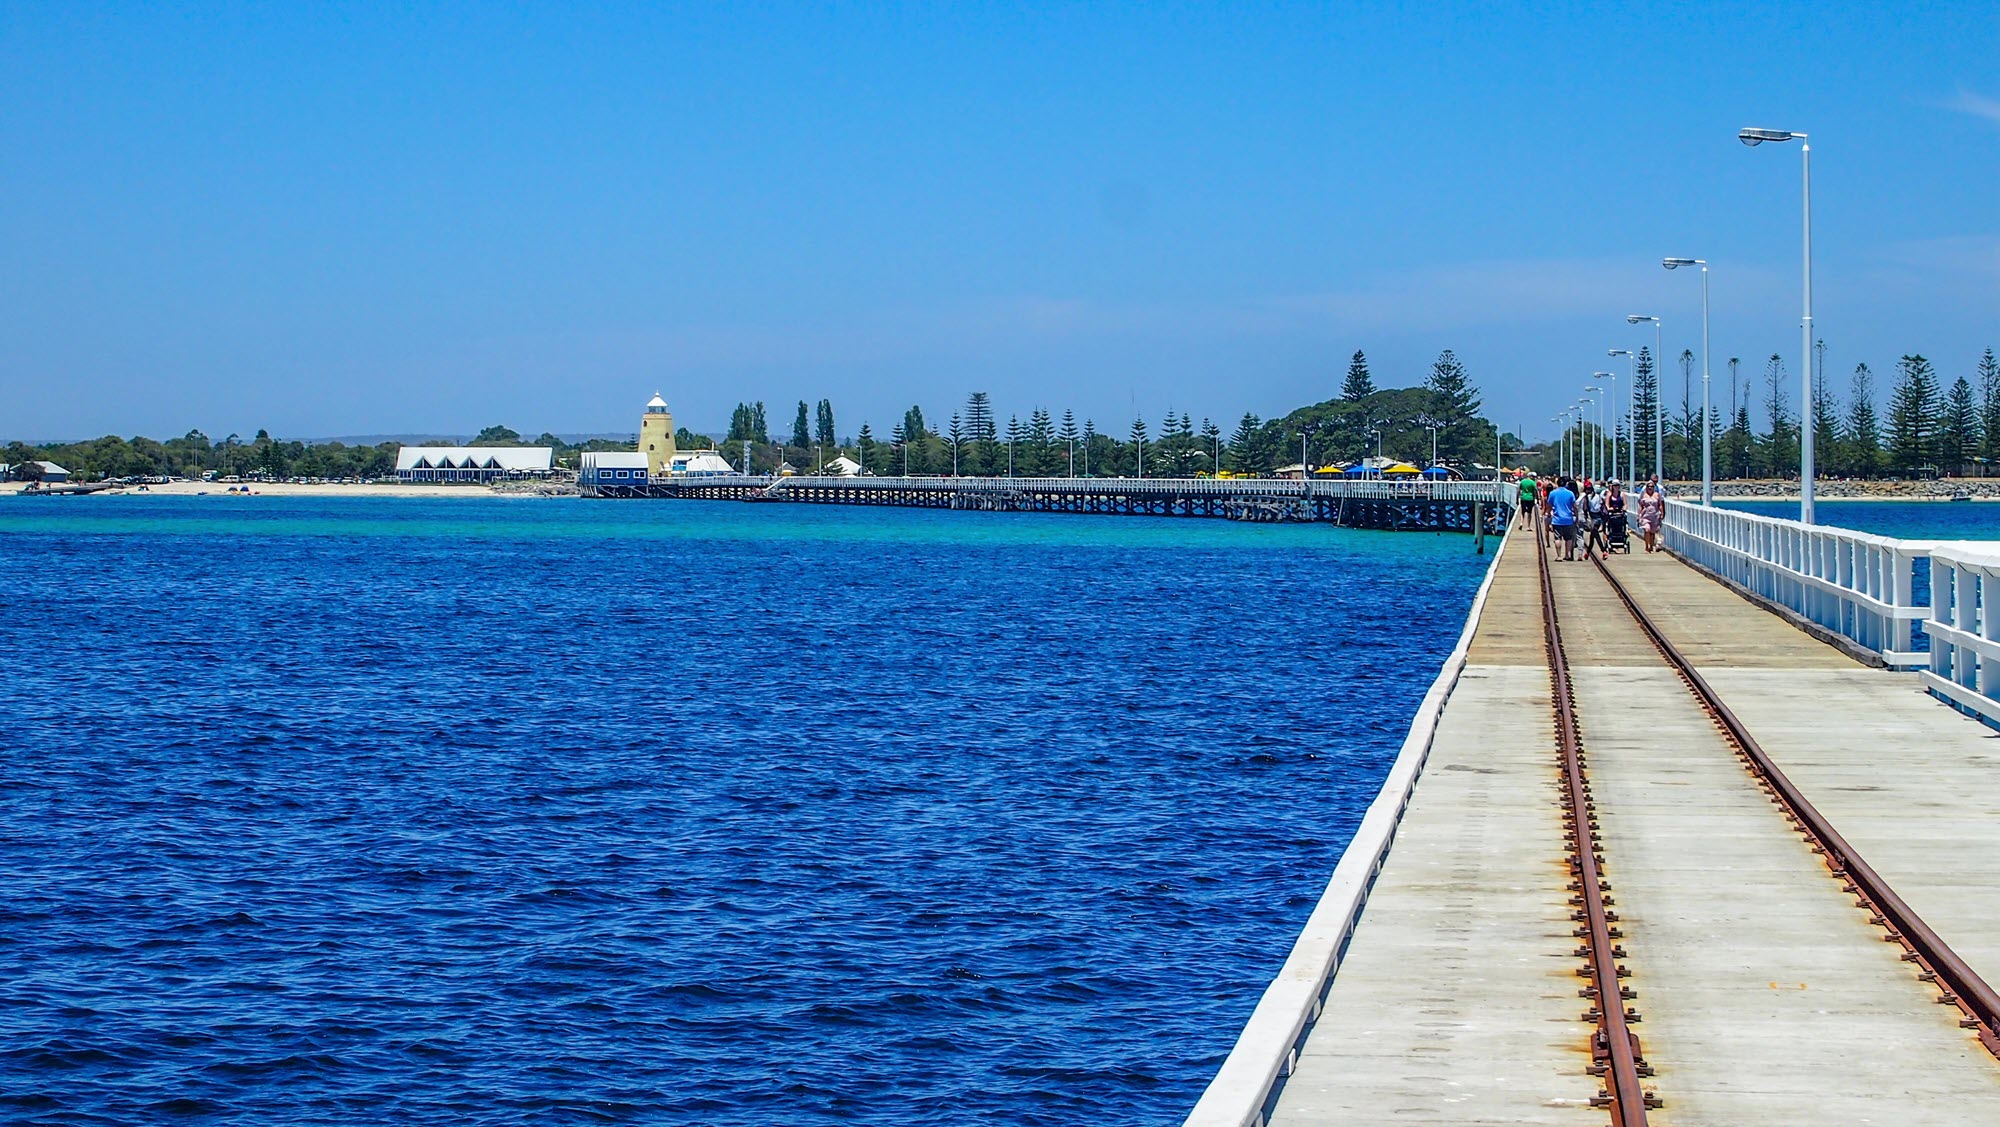 View down the long Busselton Jetty in WA's south west.